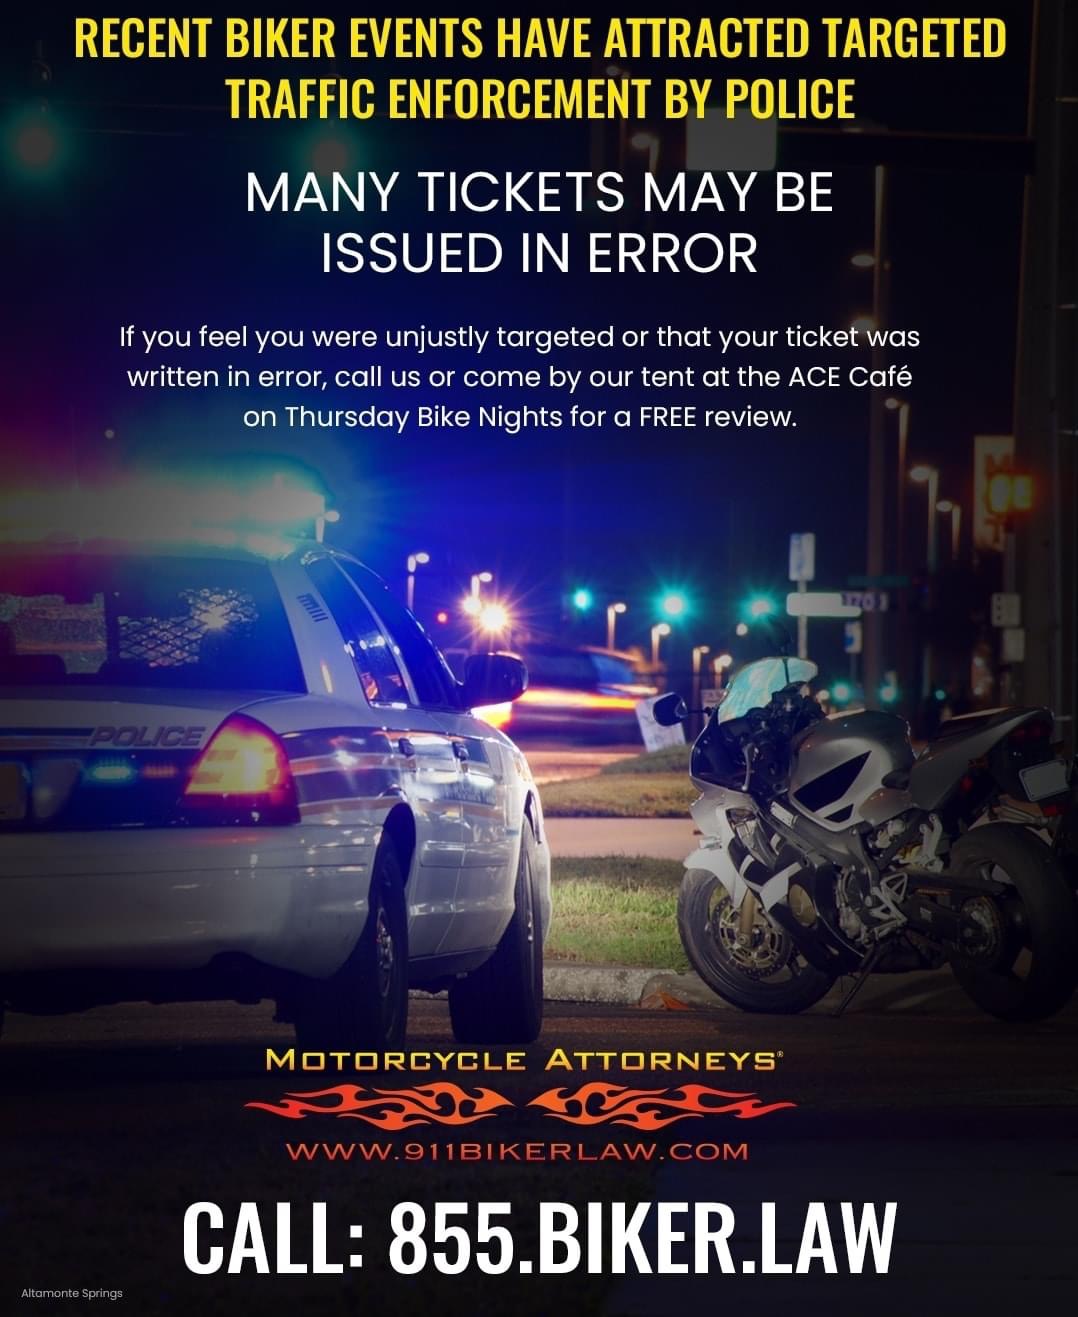 How 911 Biker Law Can Help With Motorcycle Tickets